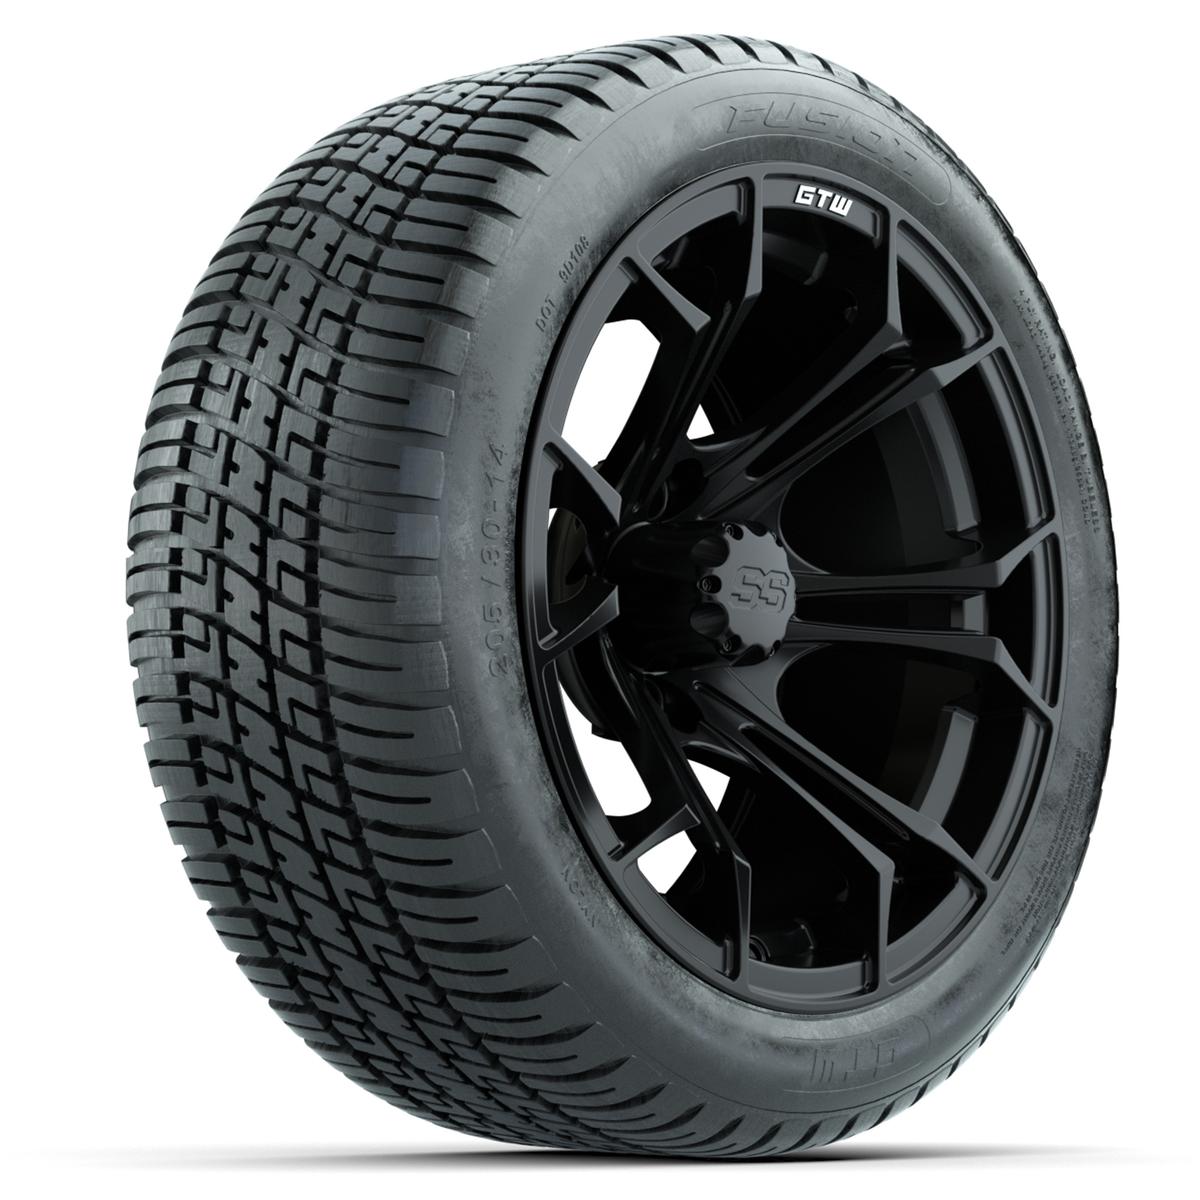 GTW Spyder Matte Black 14 in Wheels with 205/30-14 Fusion Street Tires – Full Set